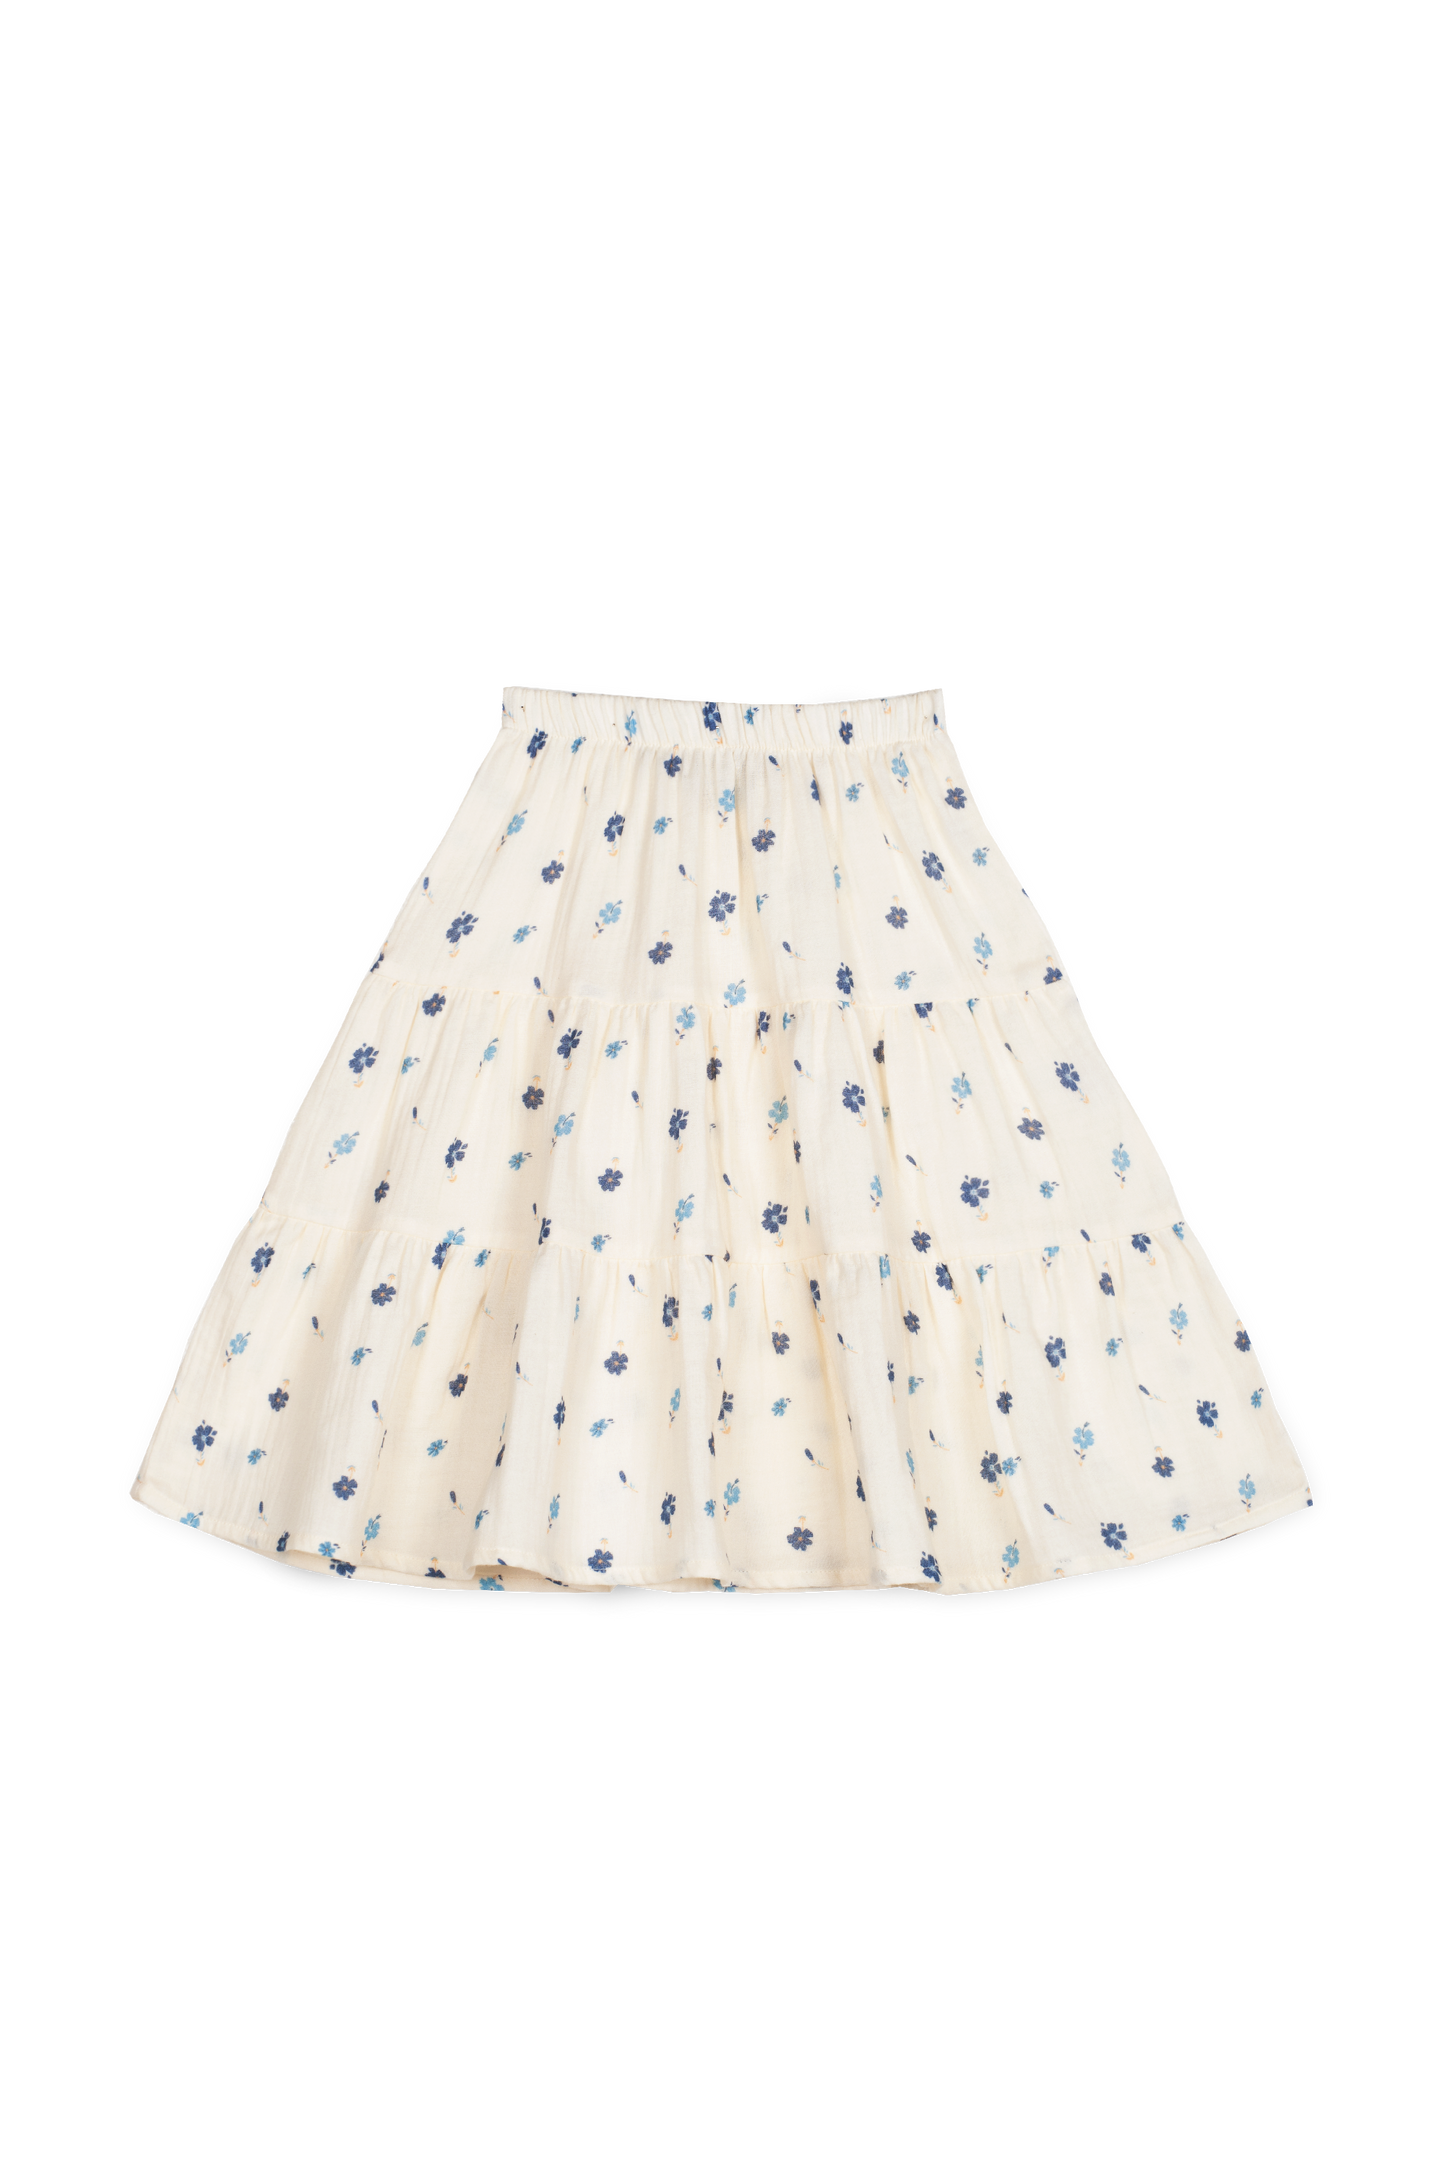 Mipounet Floral Printed Skirt - Blue